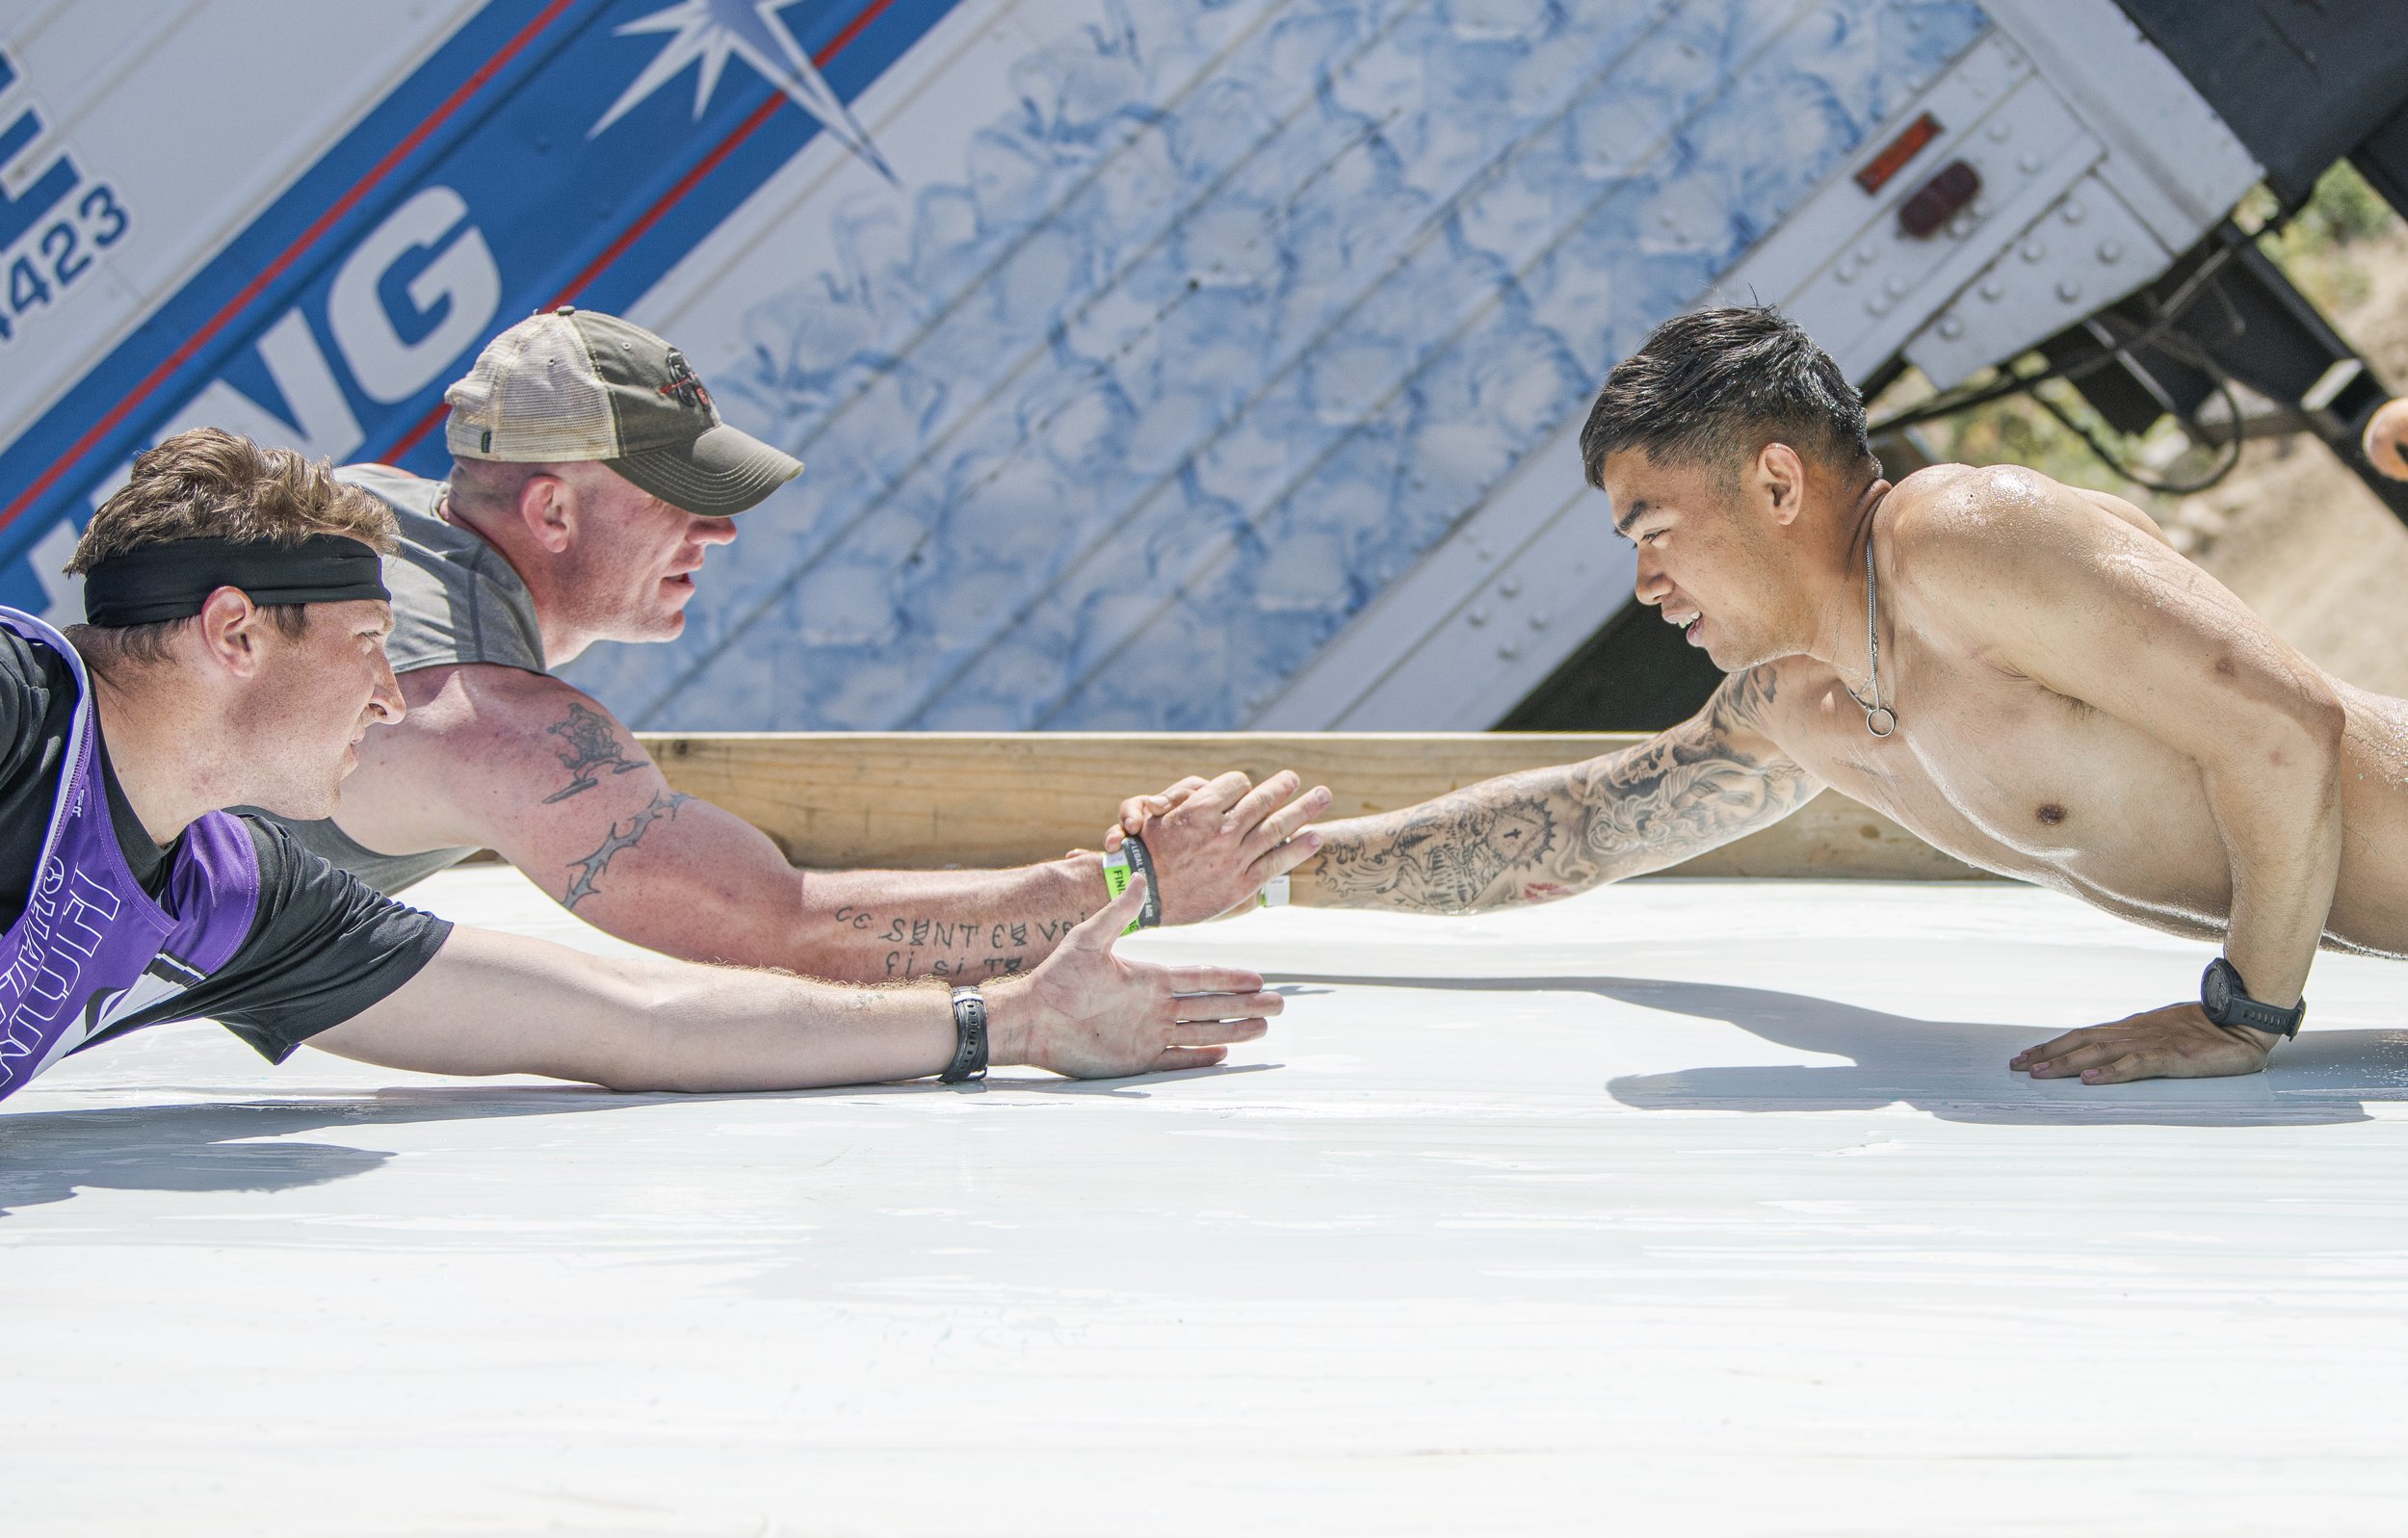  Marines from the nearby Camp Pendleton held each other over the slanted oiled wall at the final portion of the Tough Mudder event held in San Bernadino, Calif. on April 9, 2022. (Jon Putman | The Corsair) 